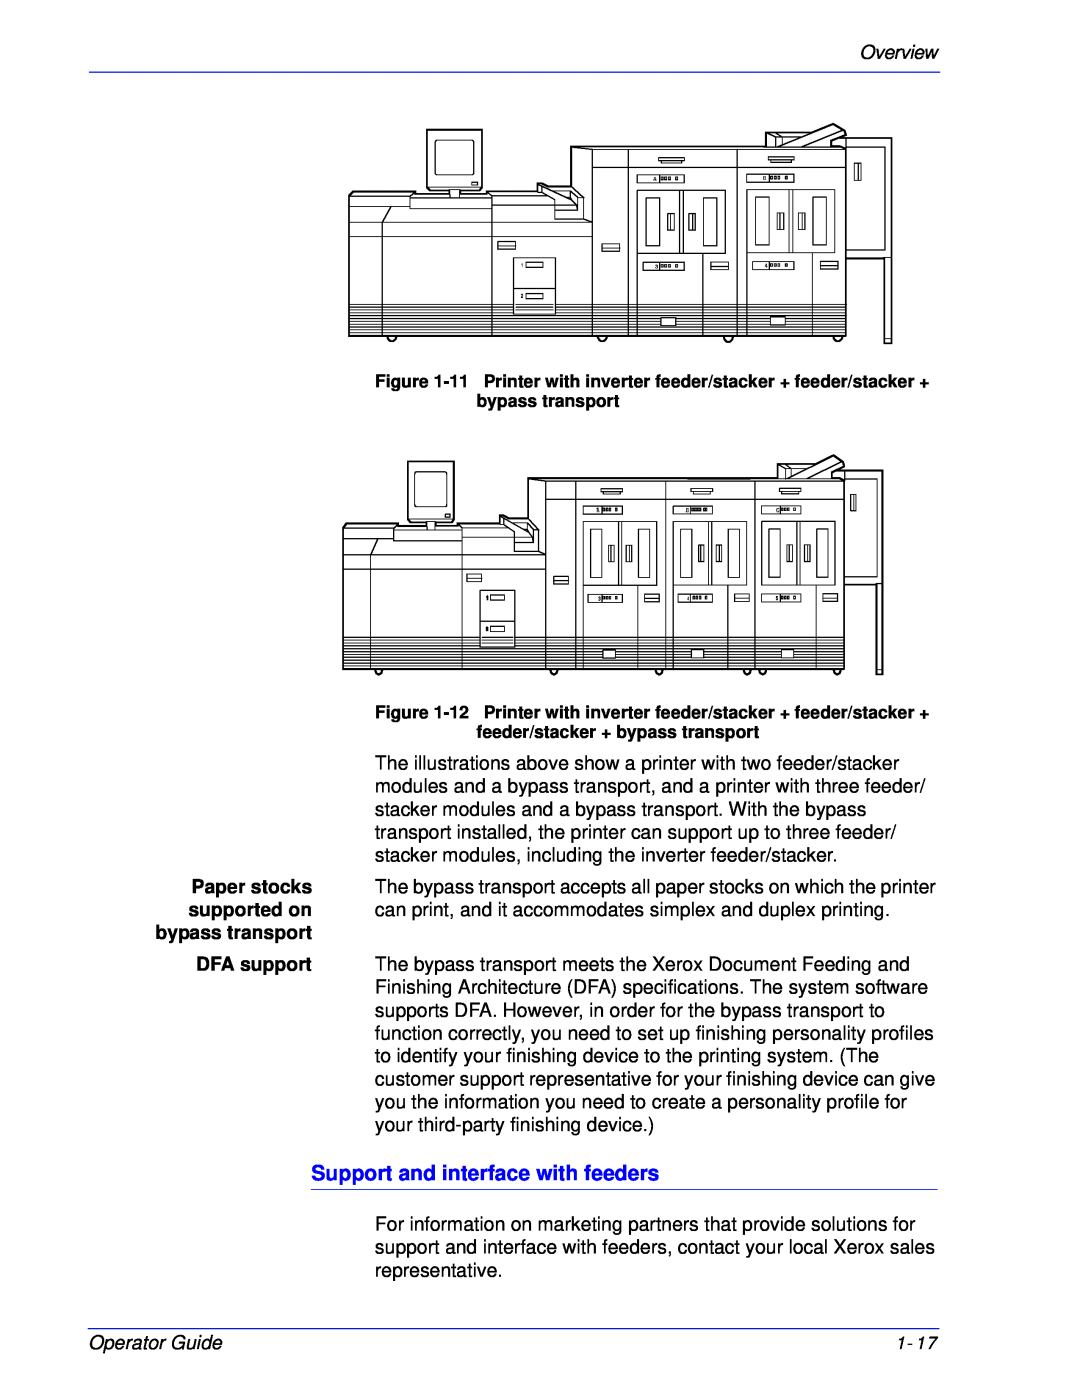 Xerox 180 EPS, 100 manual Support and interface with feeders, Operator Guide, Overview 